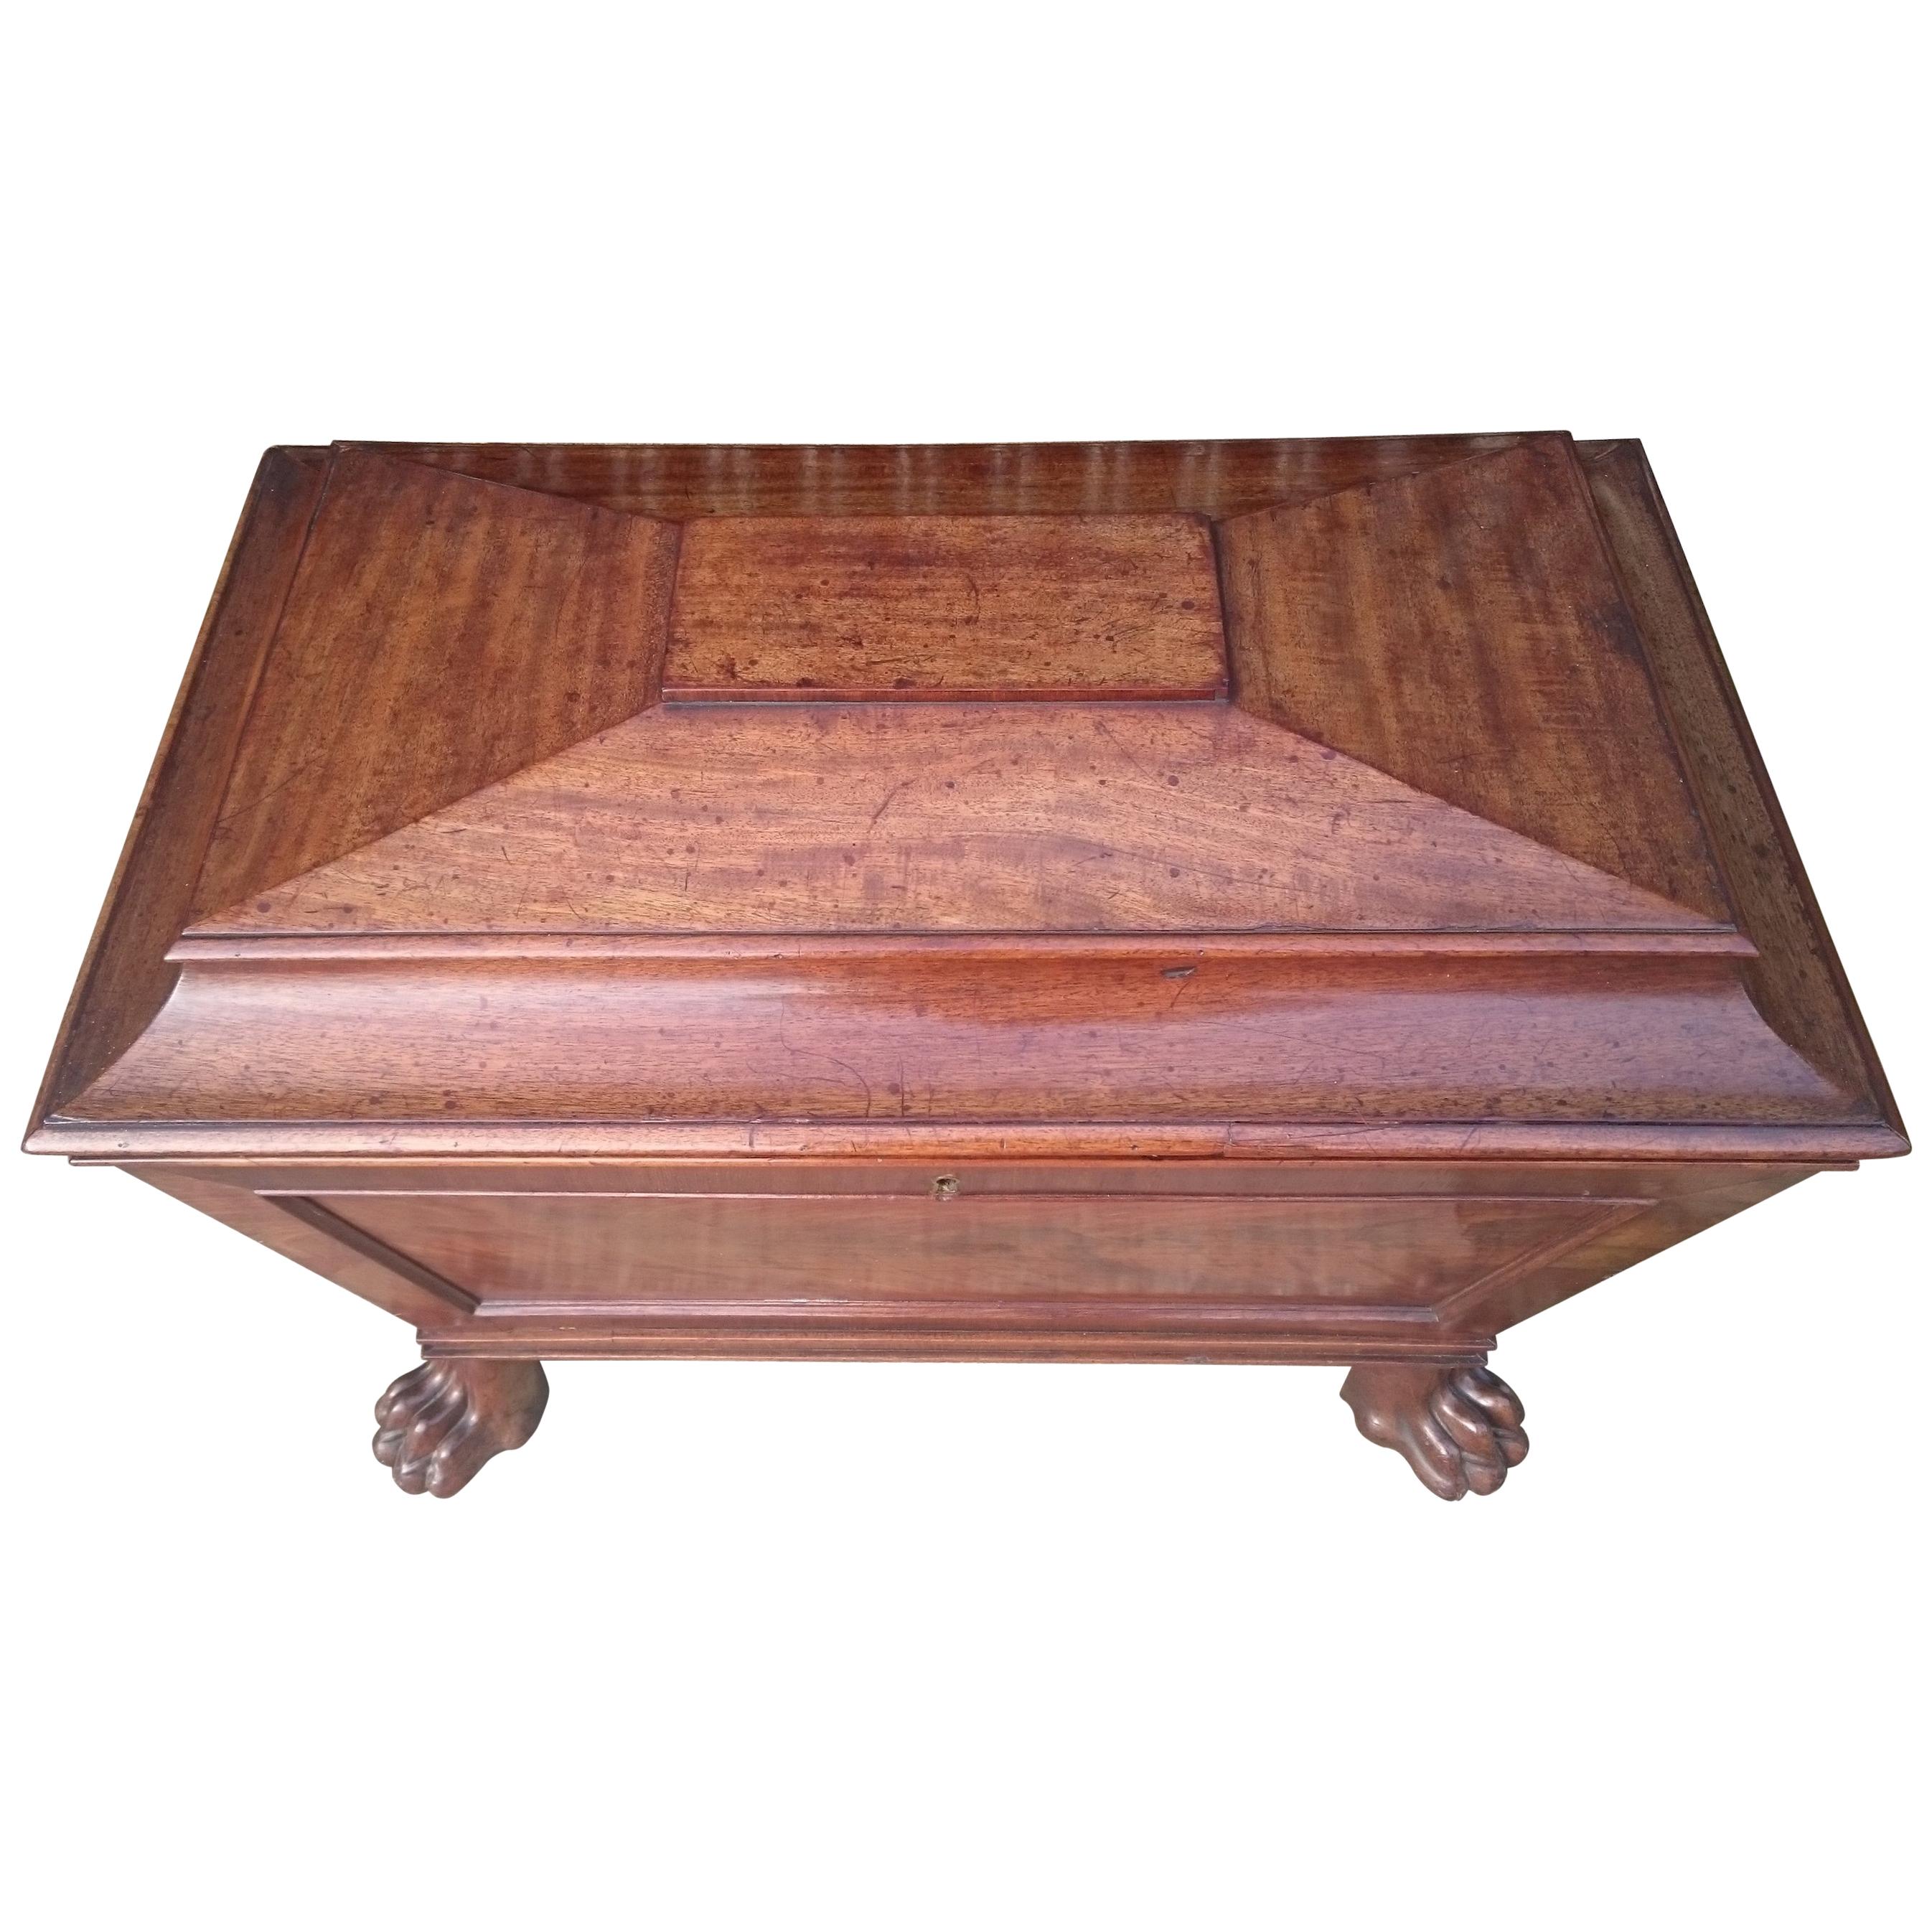 Early 19th Century Regency Mahogany Antique Wine Cooler For Sale